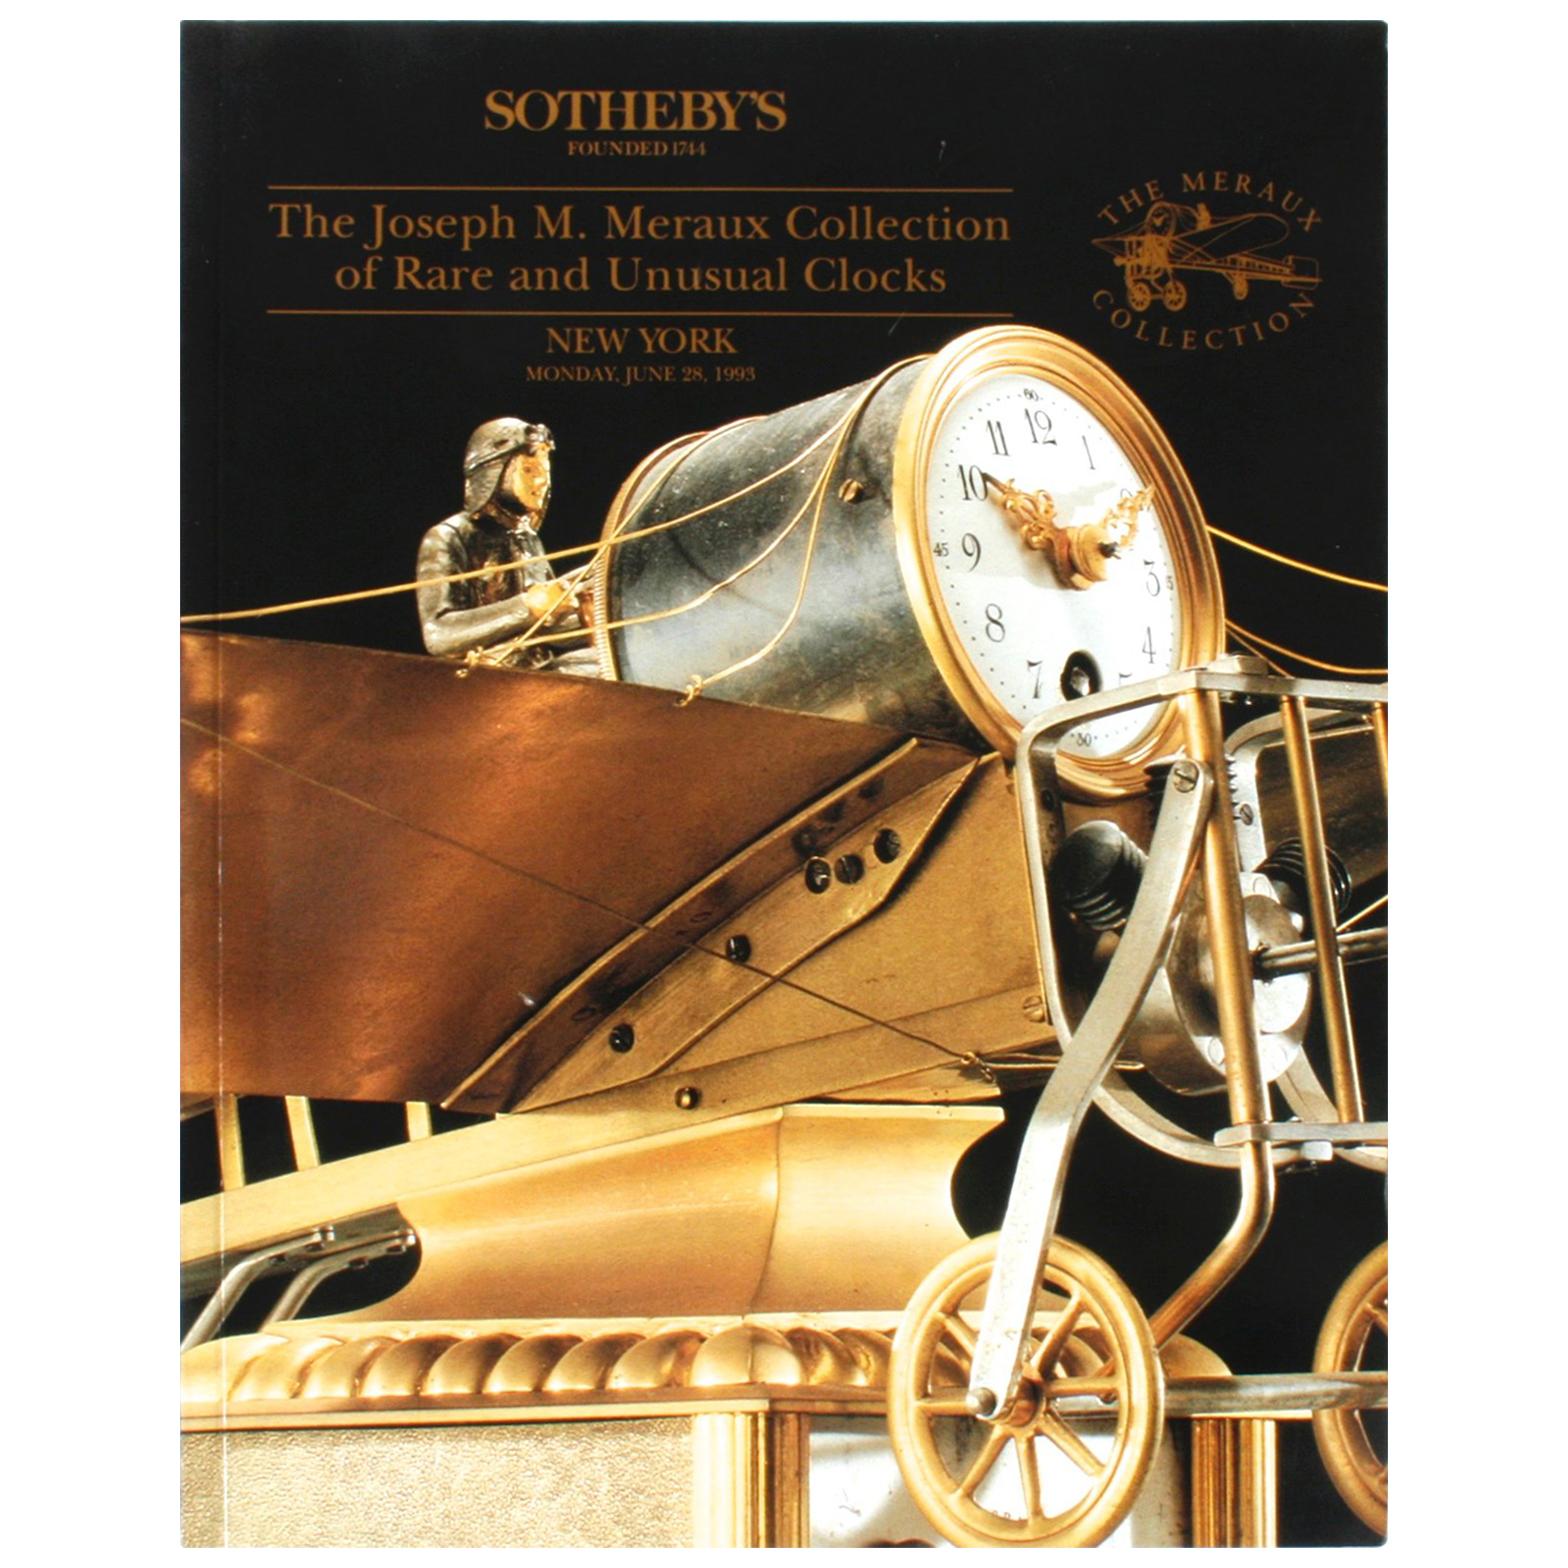 Sotheby's : The Joseph M. Meraux Collection of Rare and Unusual Clocks, 6/1993 en vente